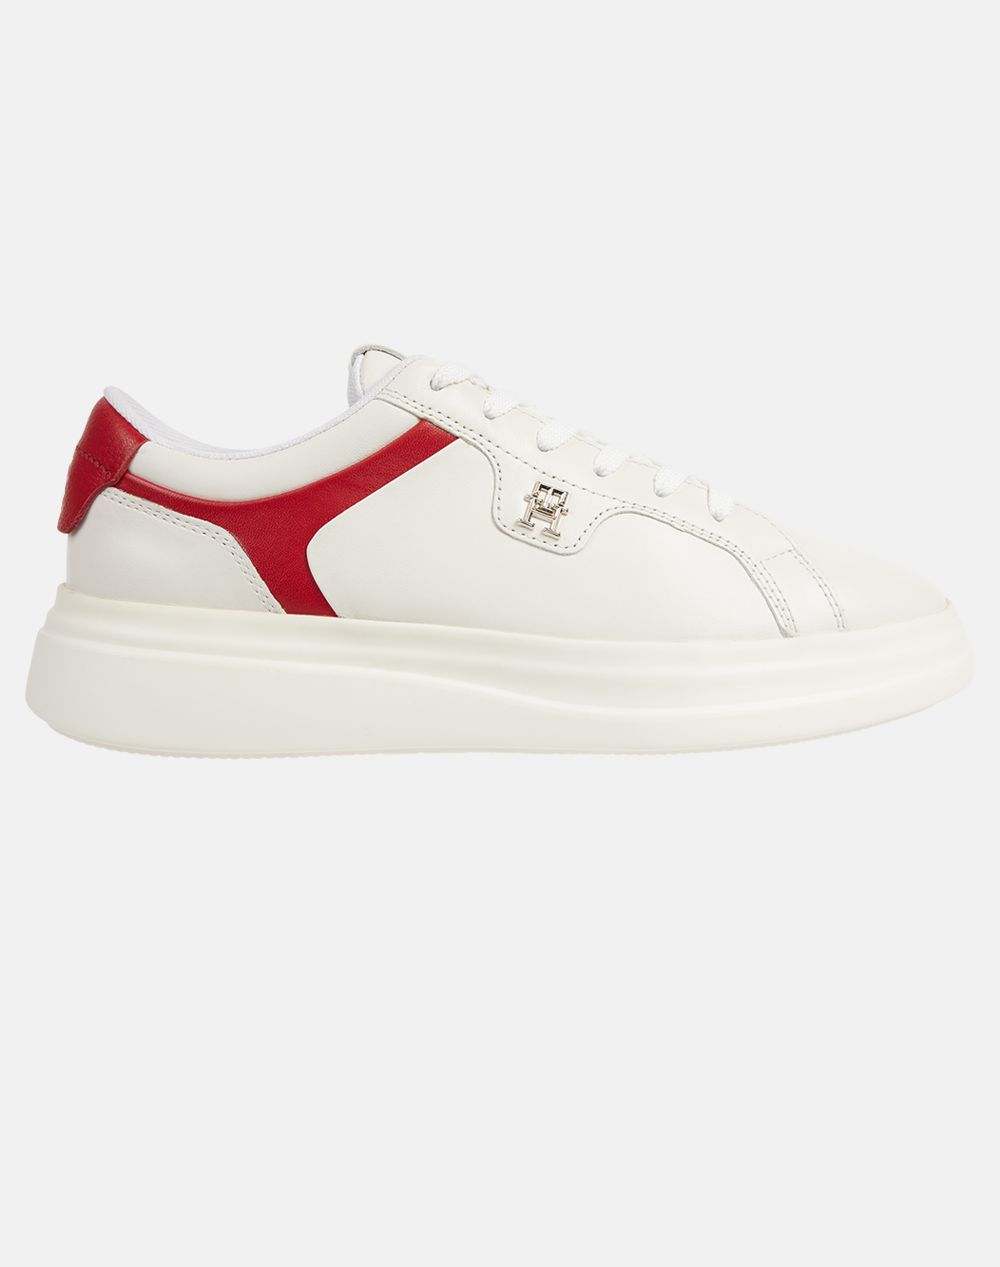 TOMMY HILFIGER POINTY COURT SNEAKER FW0FW07460-0K5 Red 3810ATOMM6070215_XR27501